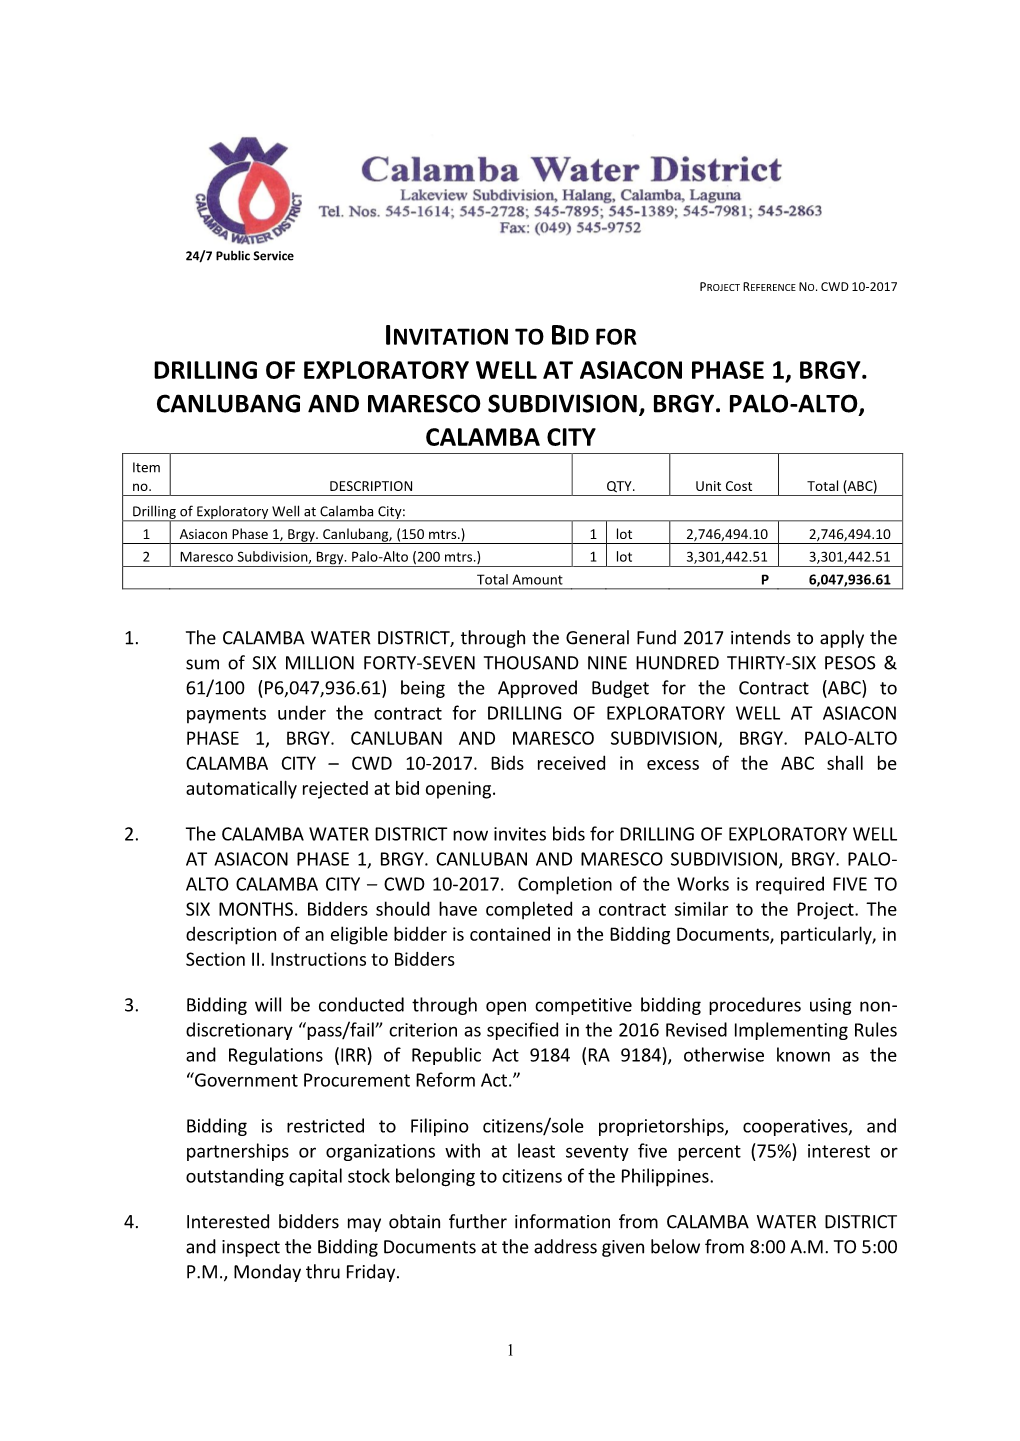 Invitation to Bid for Drilling of Exploratory Well at Asiacon Phase 1, Brgy